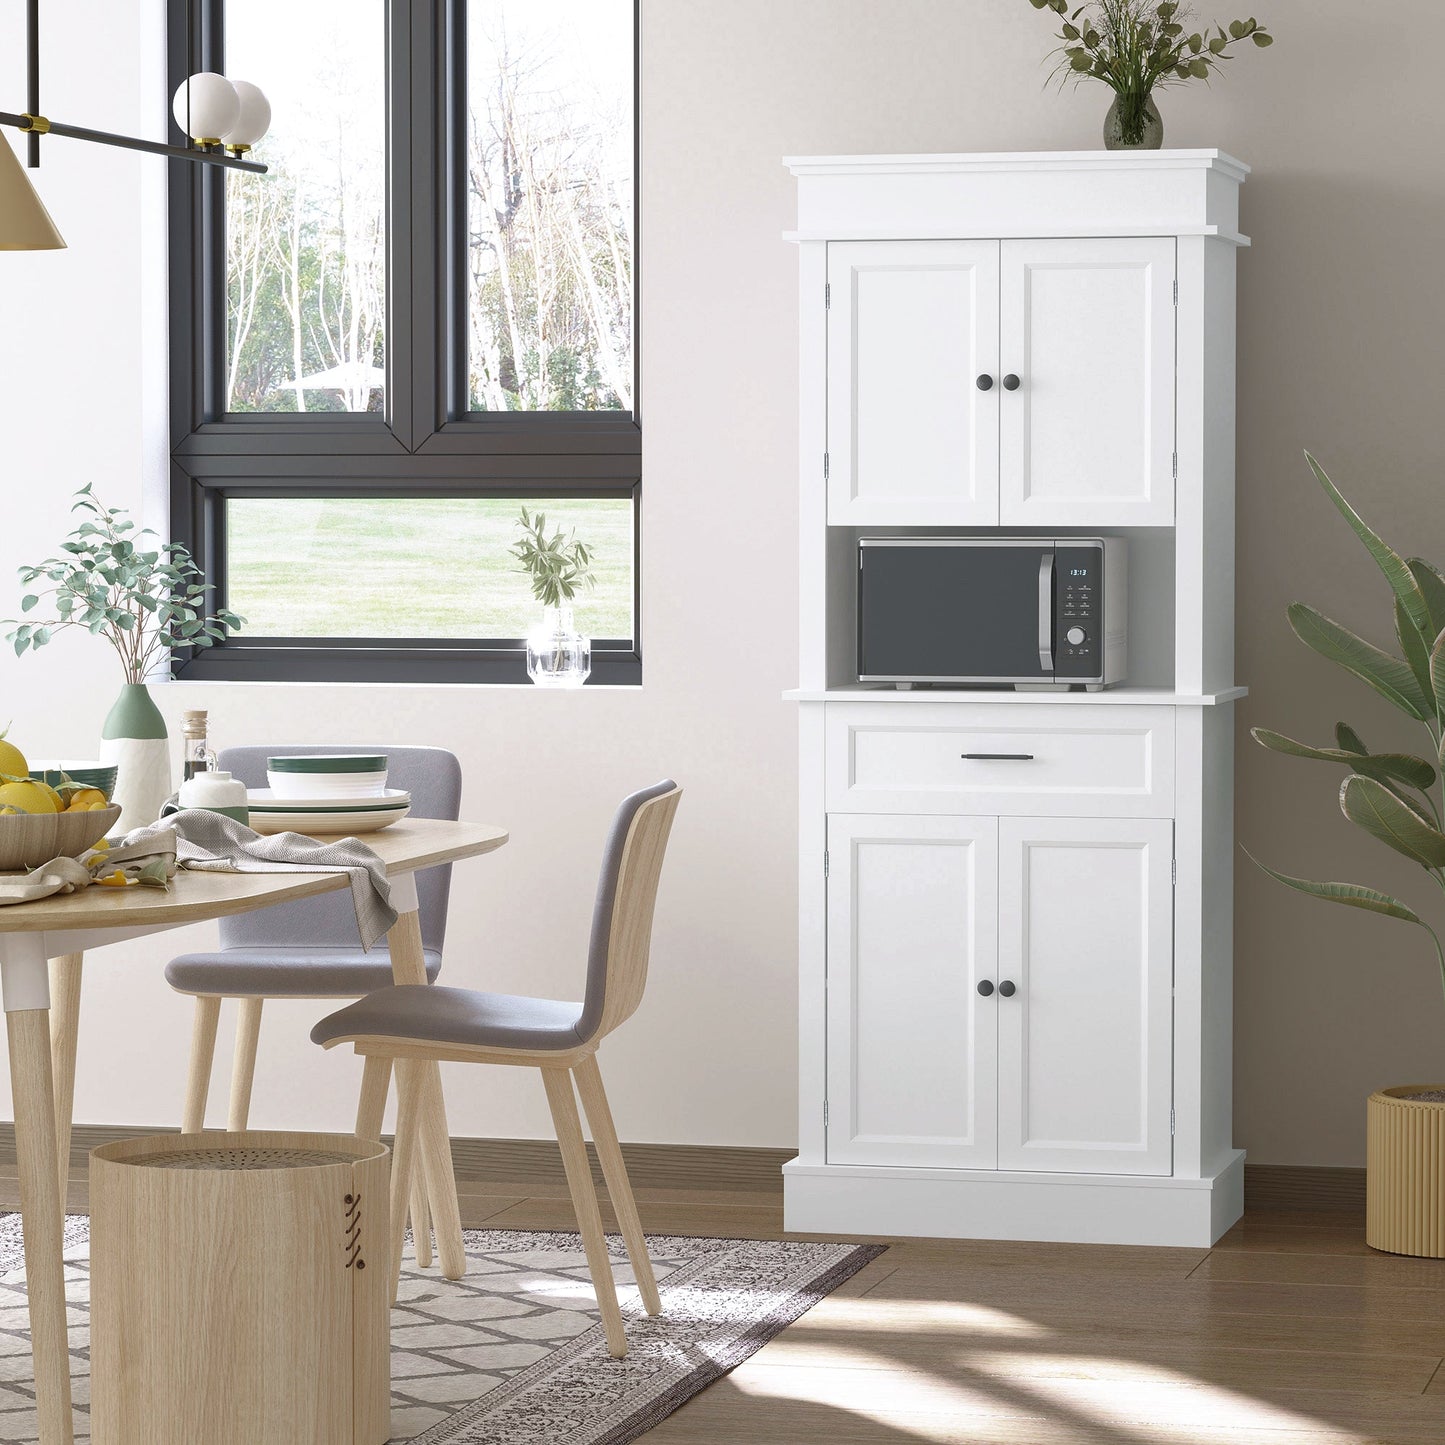 72"H Modern Freestanding Kitchen Pantry Cabinet Cupboard with Doors, Open and Adjustable Shelves, White at Gallery Canada